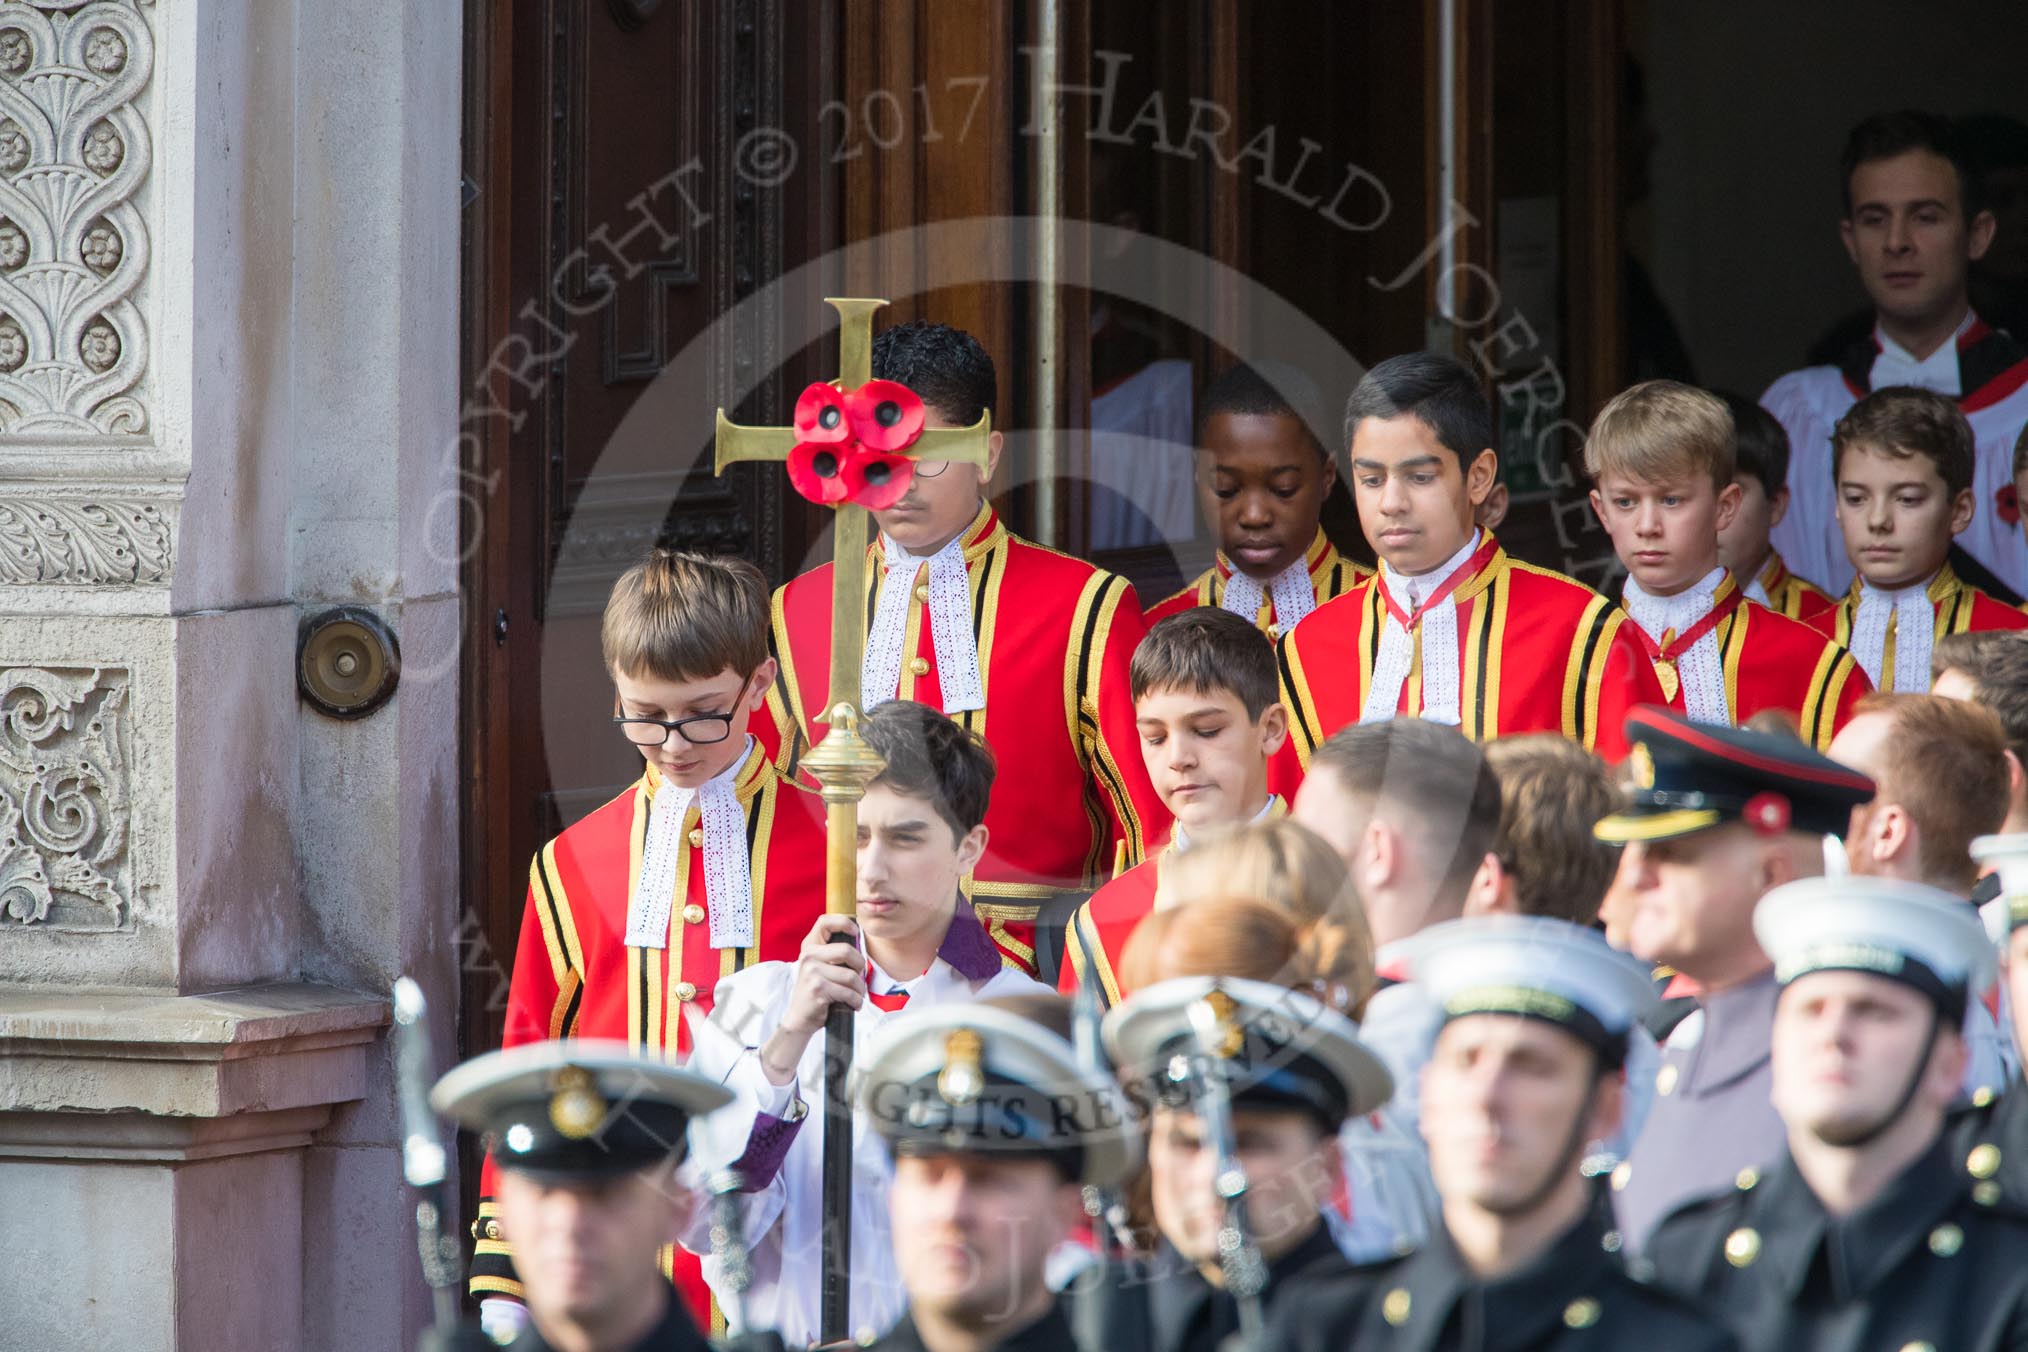 The Bishop’s Procession, here the the Choir, led by the Cross­Bearer, Michael Clayton Jolly, leaving the Foreign and Commonwealth Office during the Remembrance Sunday Cenotaph Ceremony 2018 at Horse Guards Parade, Westminster, London, 11 November 2018, 10:53.